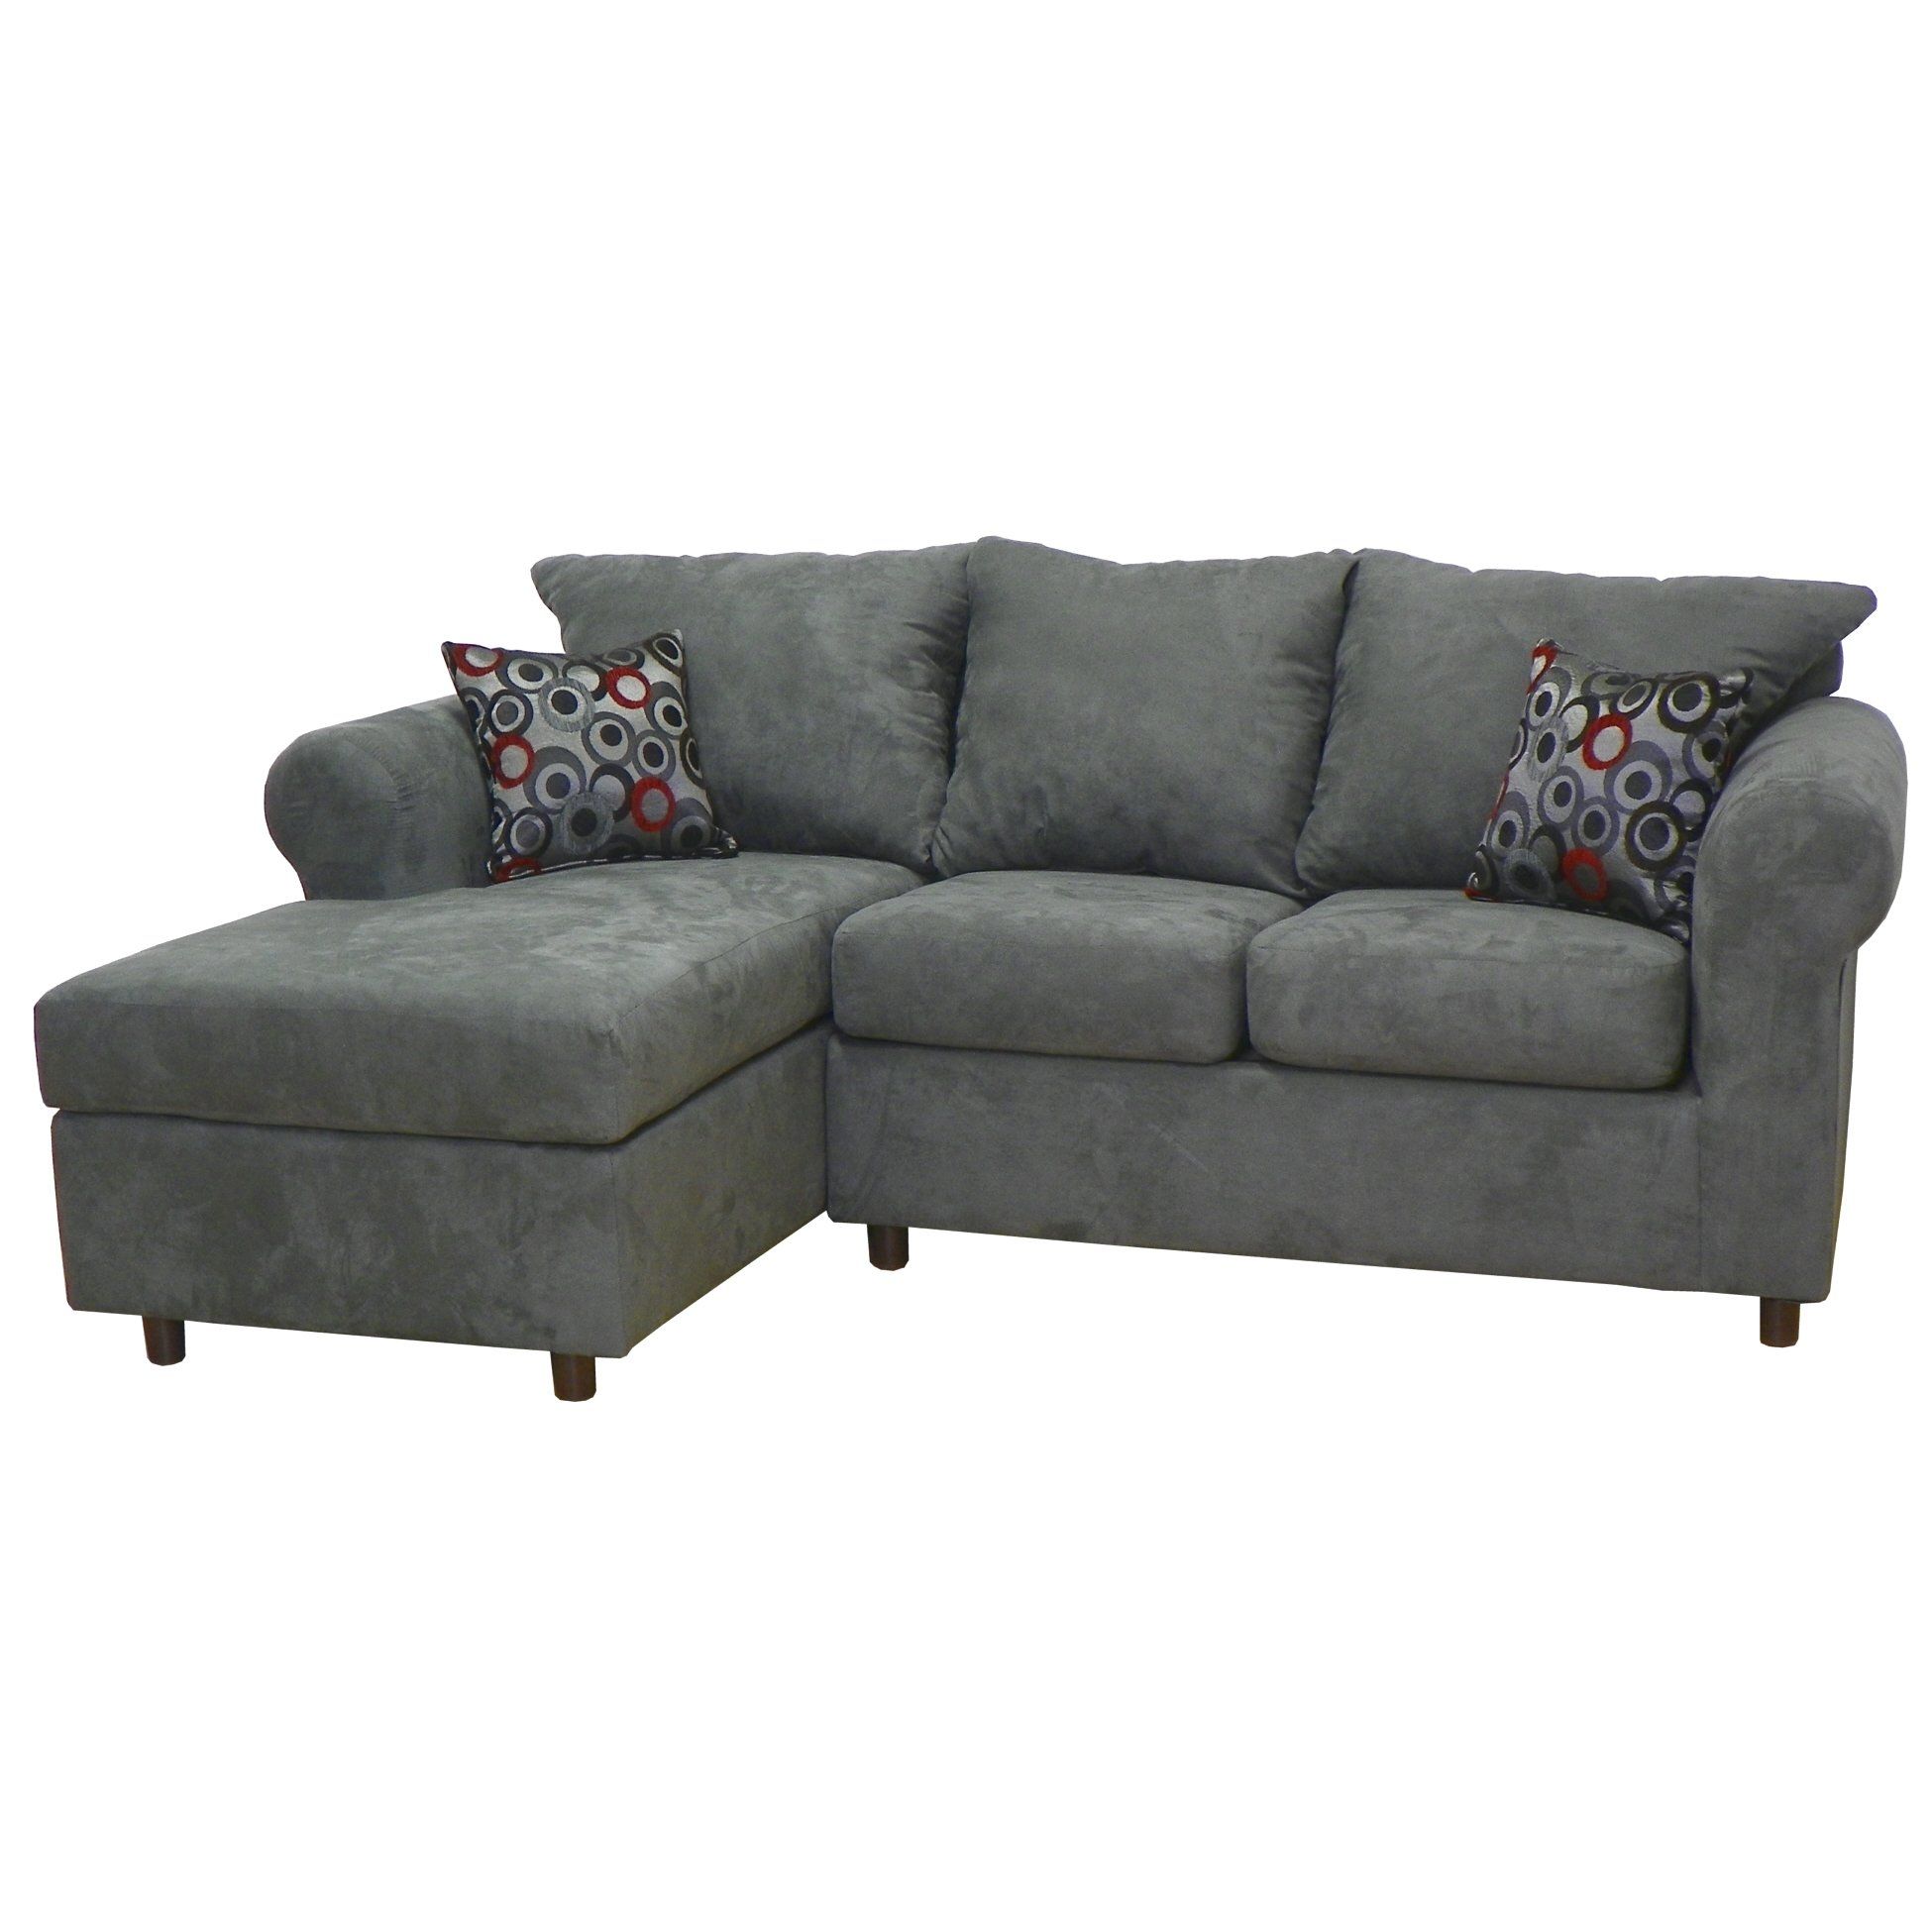 Sectional Sofas Youll Love Wayfair With Regard To Condo Sectional Sofas (View 9 of 15)